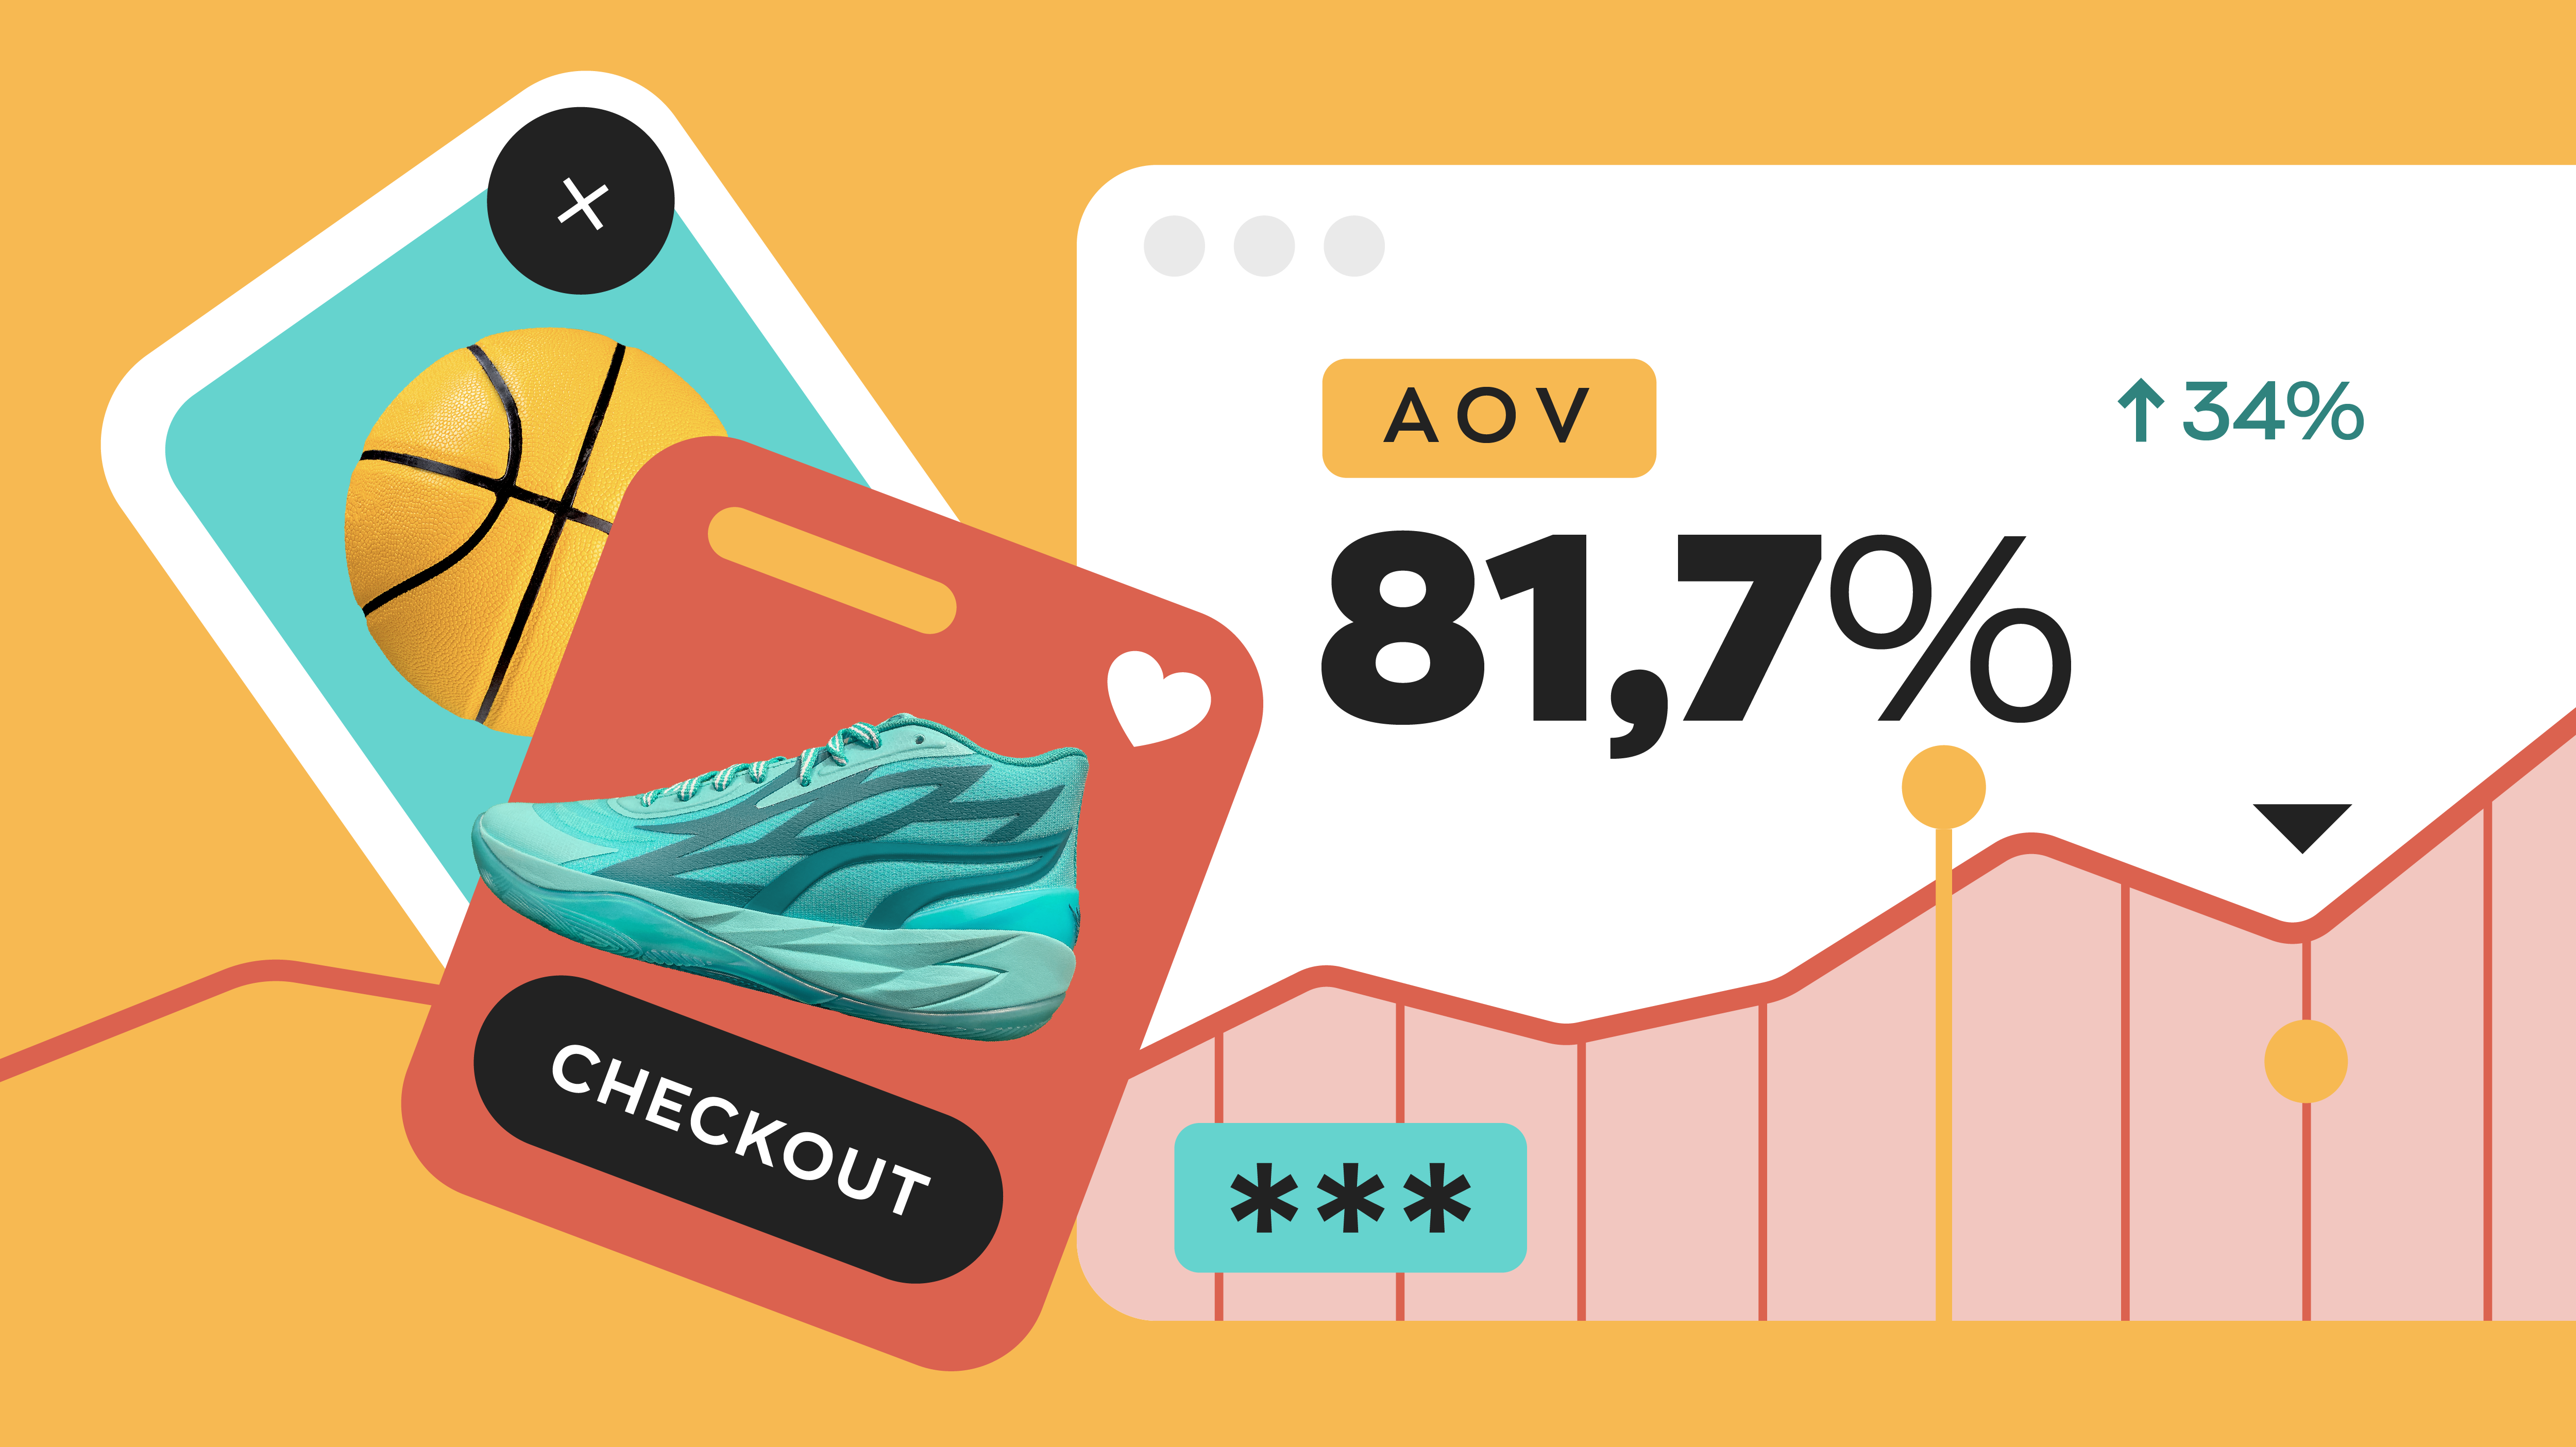 A Quick Guide to Average Order Value (AOV) for Retailers